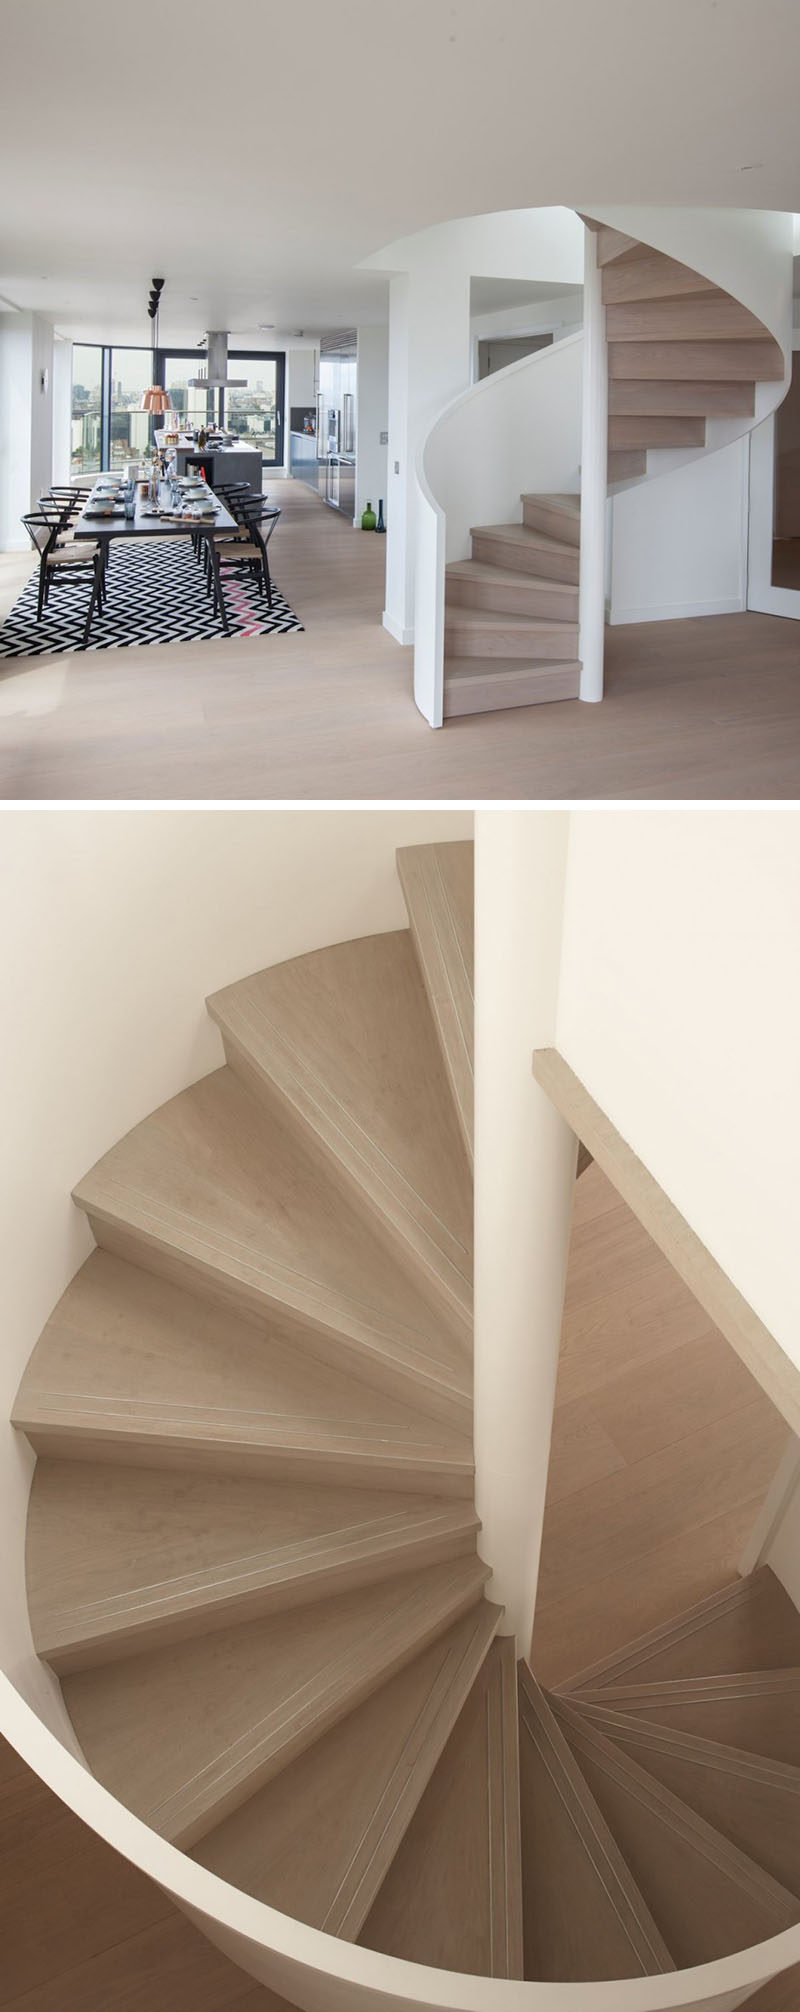 This light wood spiral staircase twirls up around a central shaft, while the white handrail helps the stairs blend in with the surrounding interior. #SpiralStairs #SpiralStaircase #ModernSpiralStairs